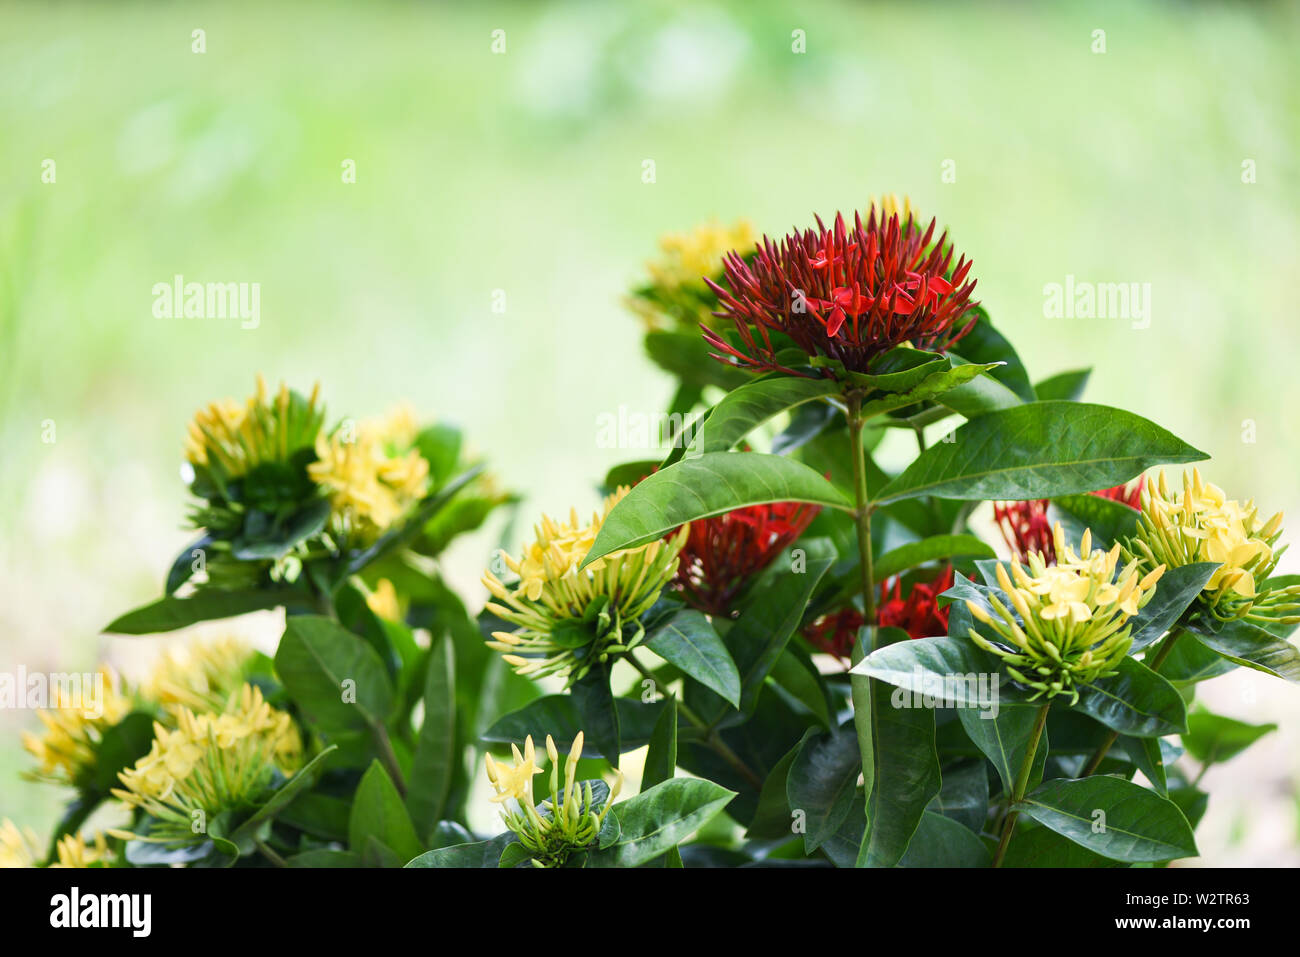 Ixora flower red and yellow blooming in the garden beautiful nature green background / Chinensis Ixora coccinea Stock Photo